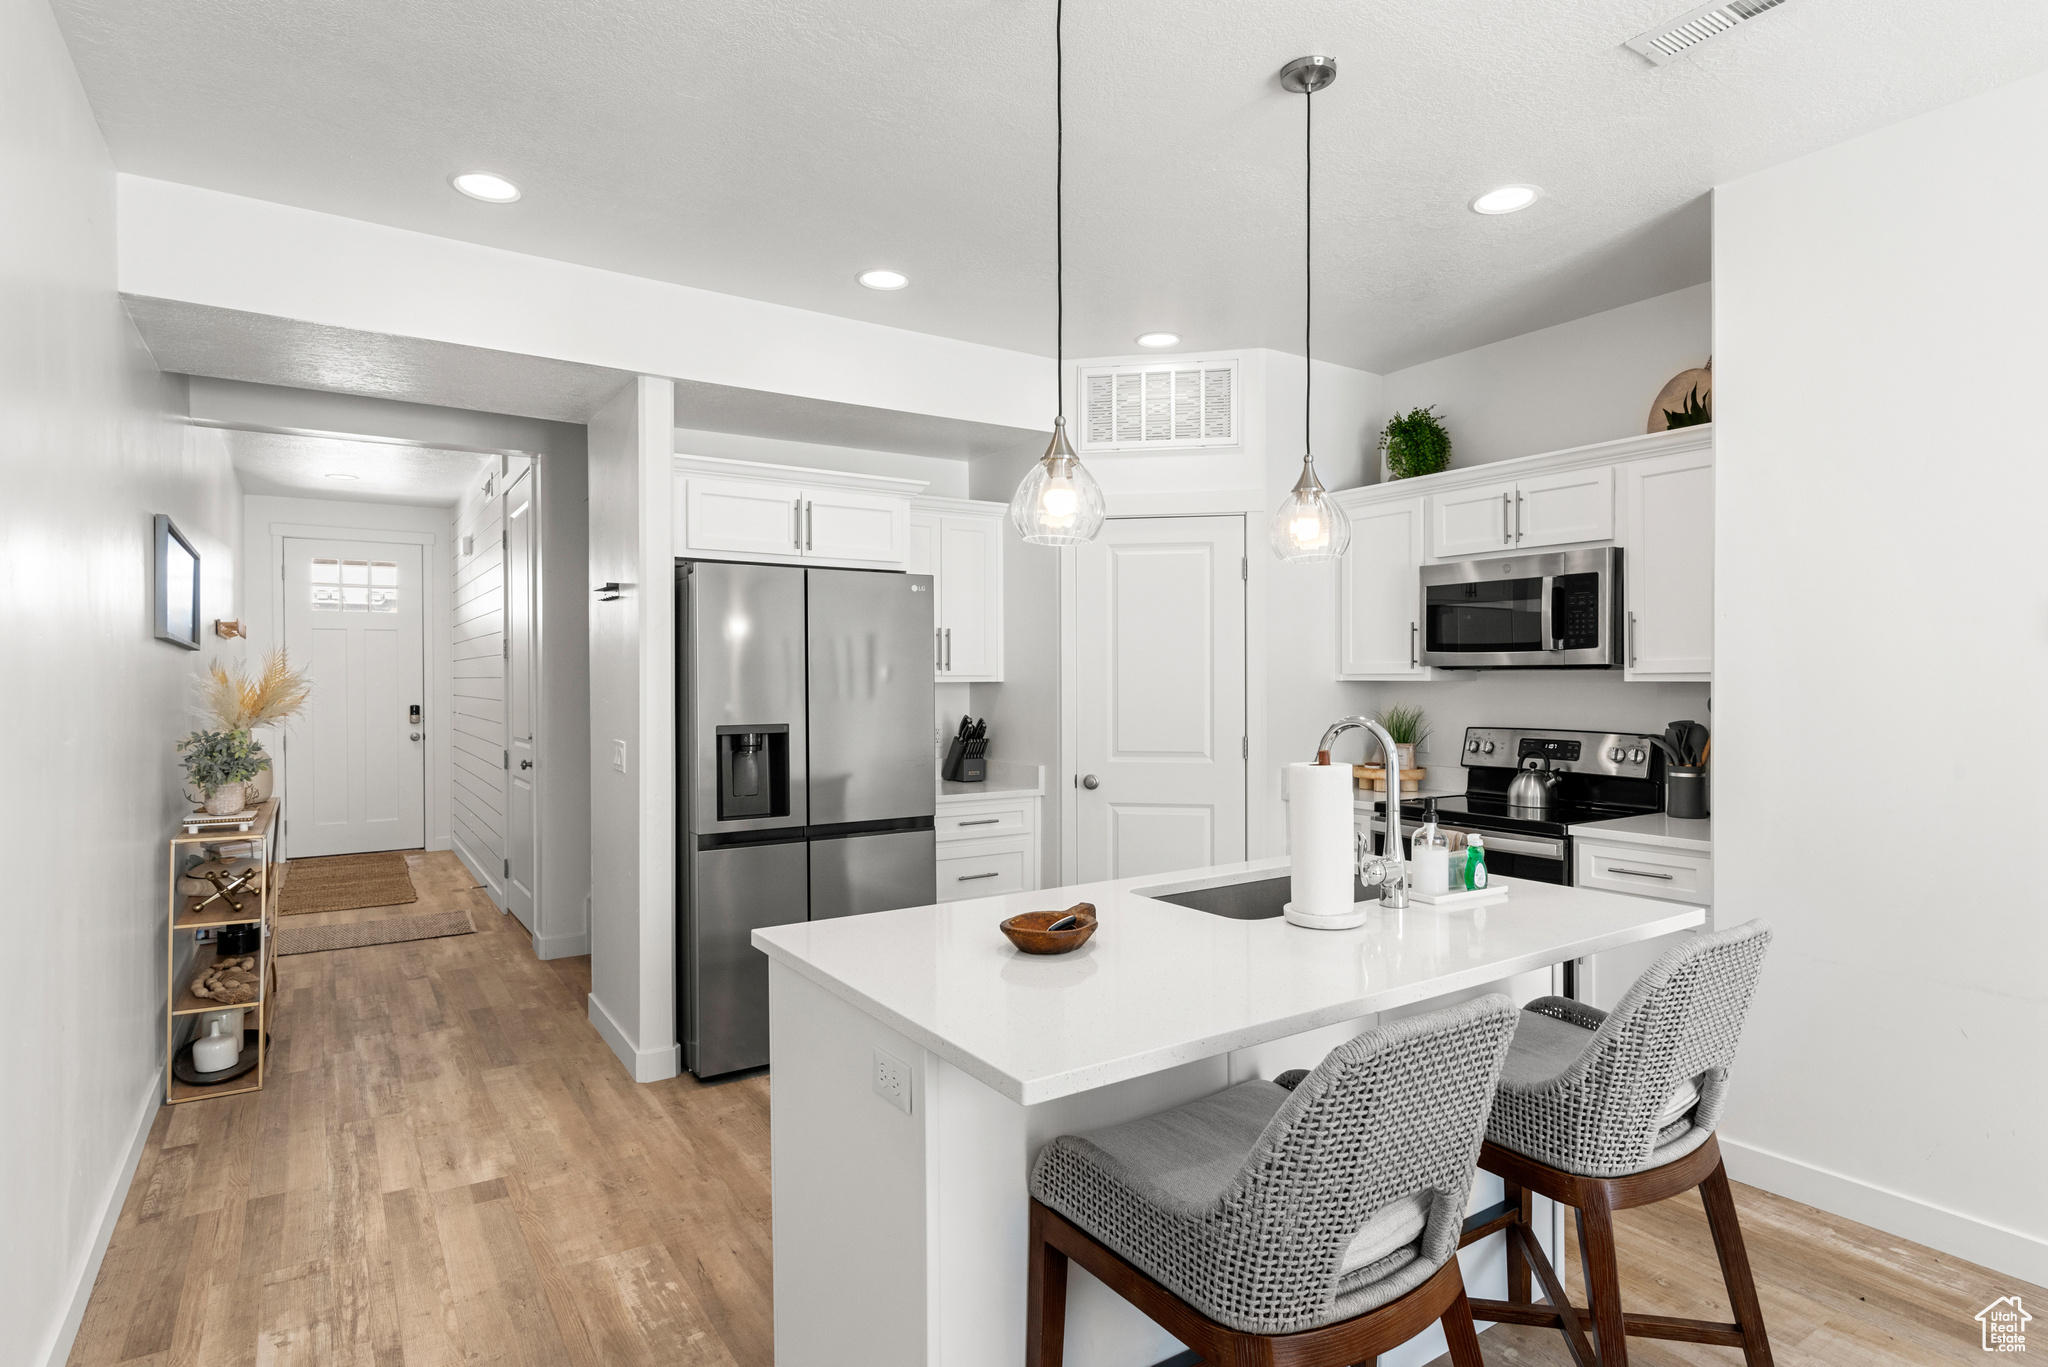 Kitchen featuring pendant lighting, light hardwood / wood-style floors, white cabinetry, stainless steel appliances, and a kitchen island with sink